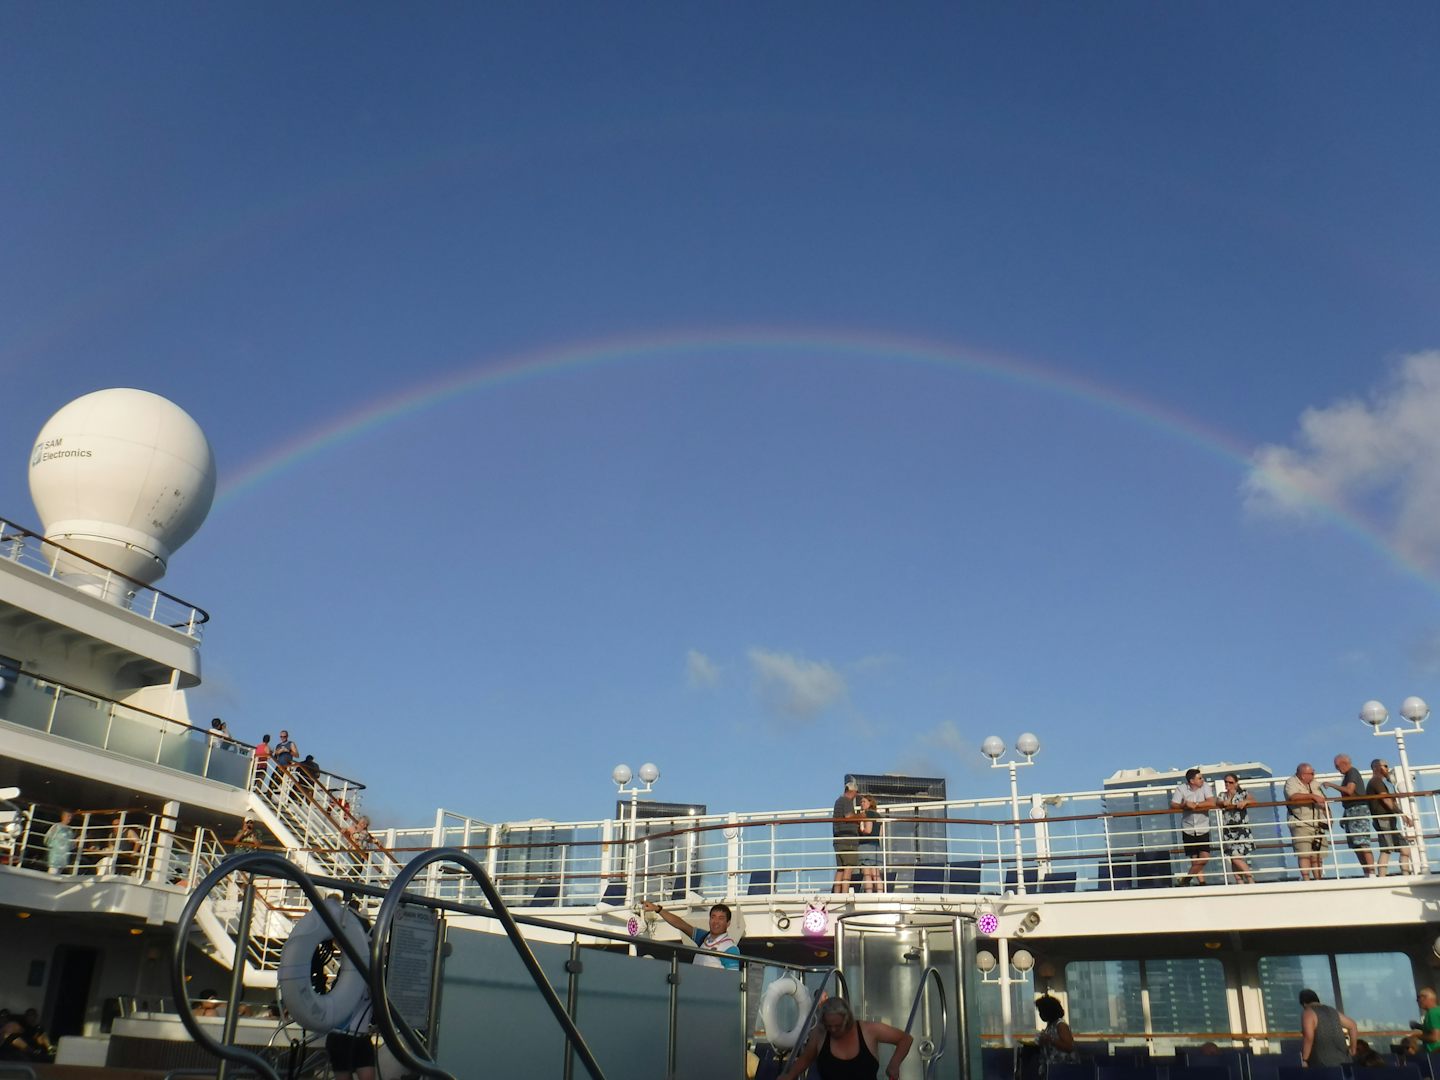 Welcome Aboard rainbow-Hawaii is famous for her rainbows!